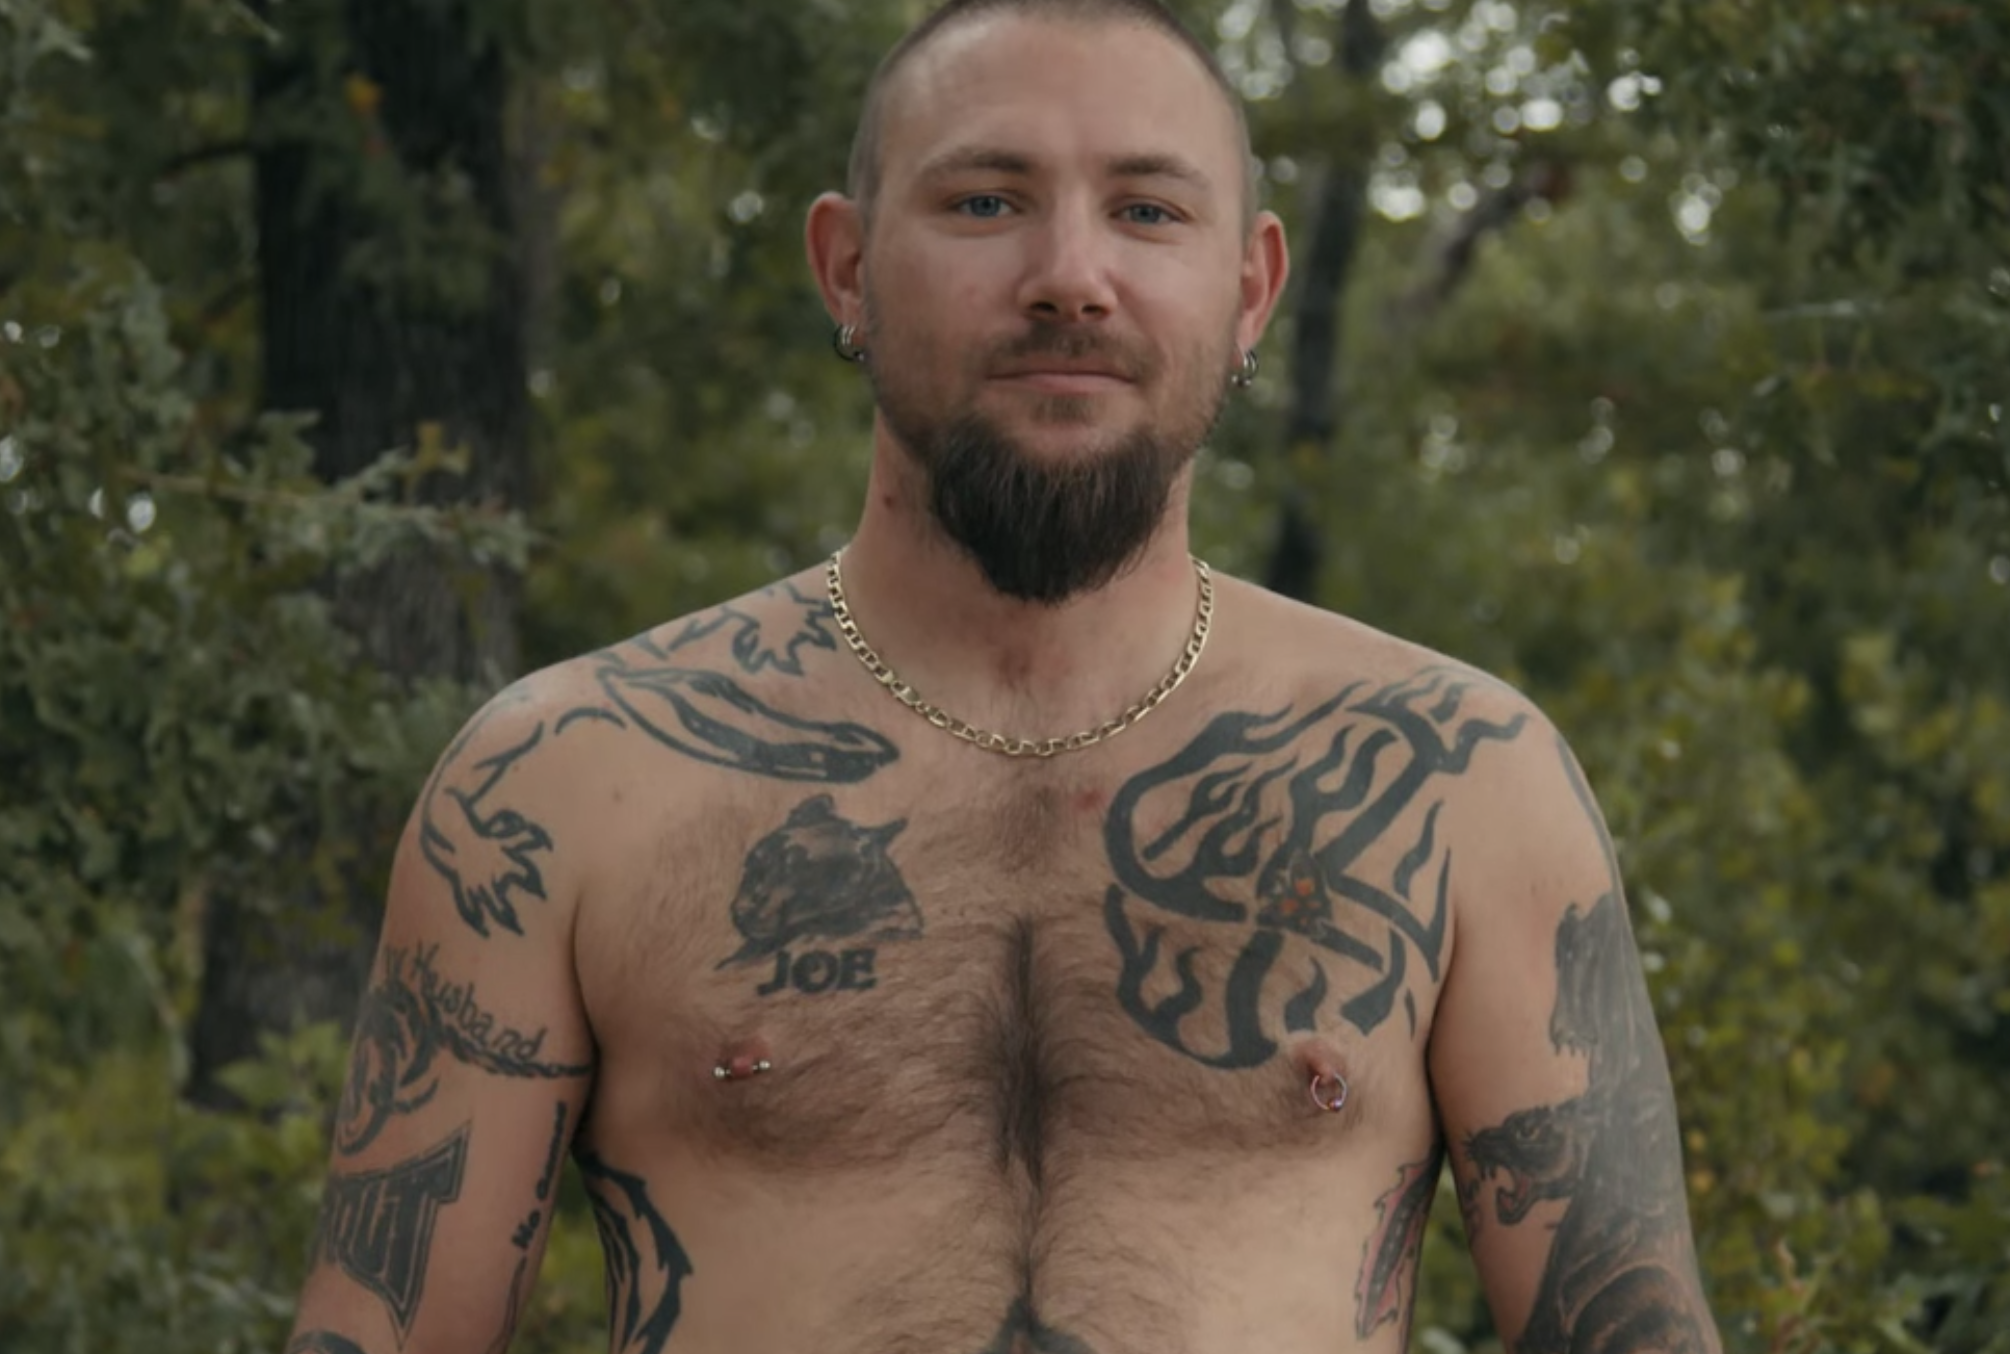 John Finlay smirking while shirtless outdoors. His body has several tattoos and piercings.